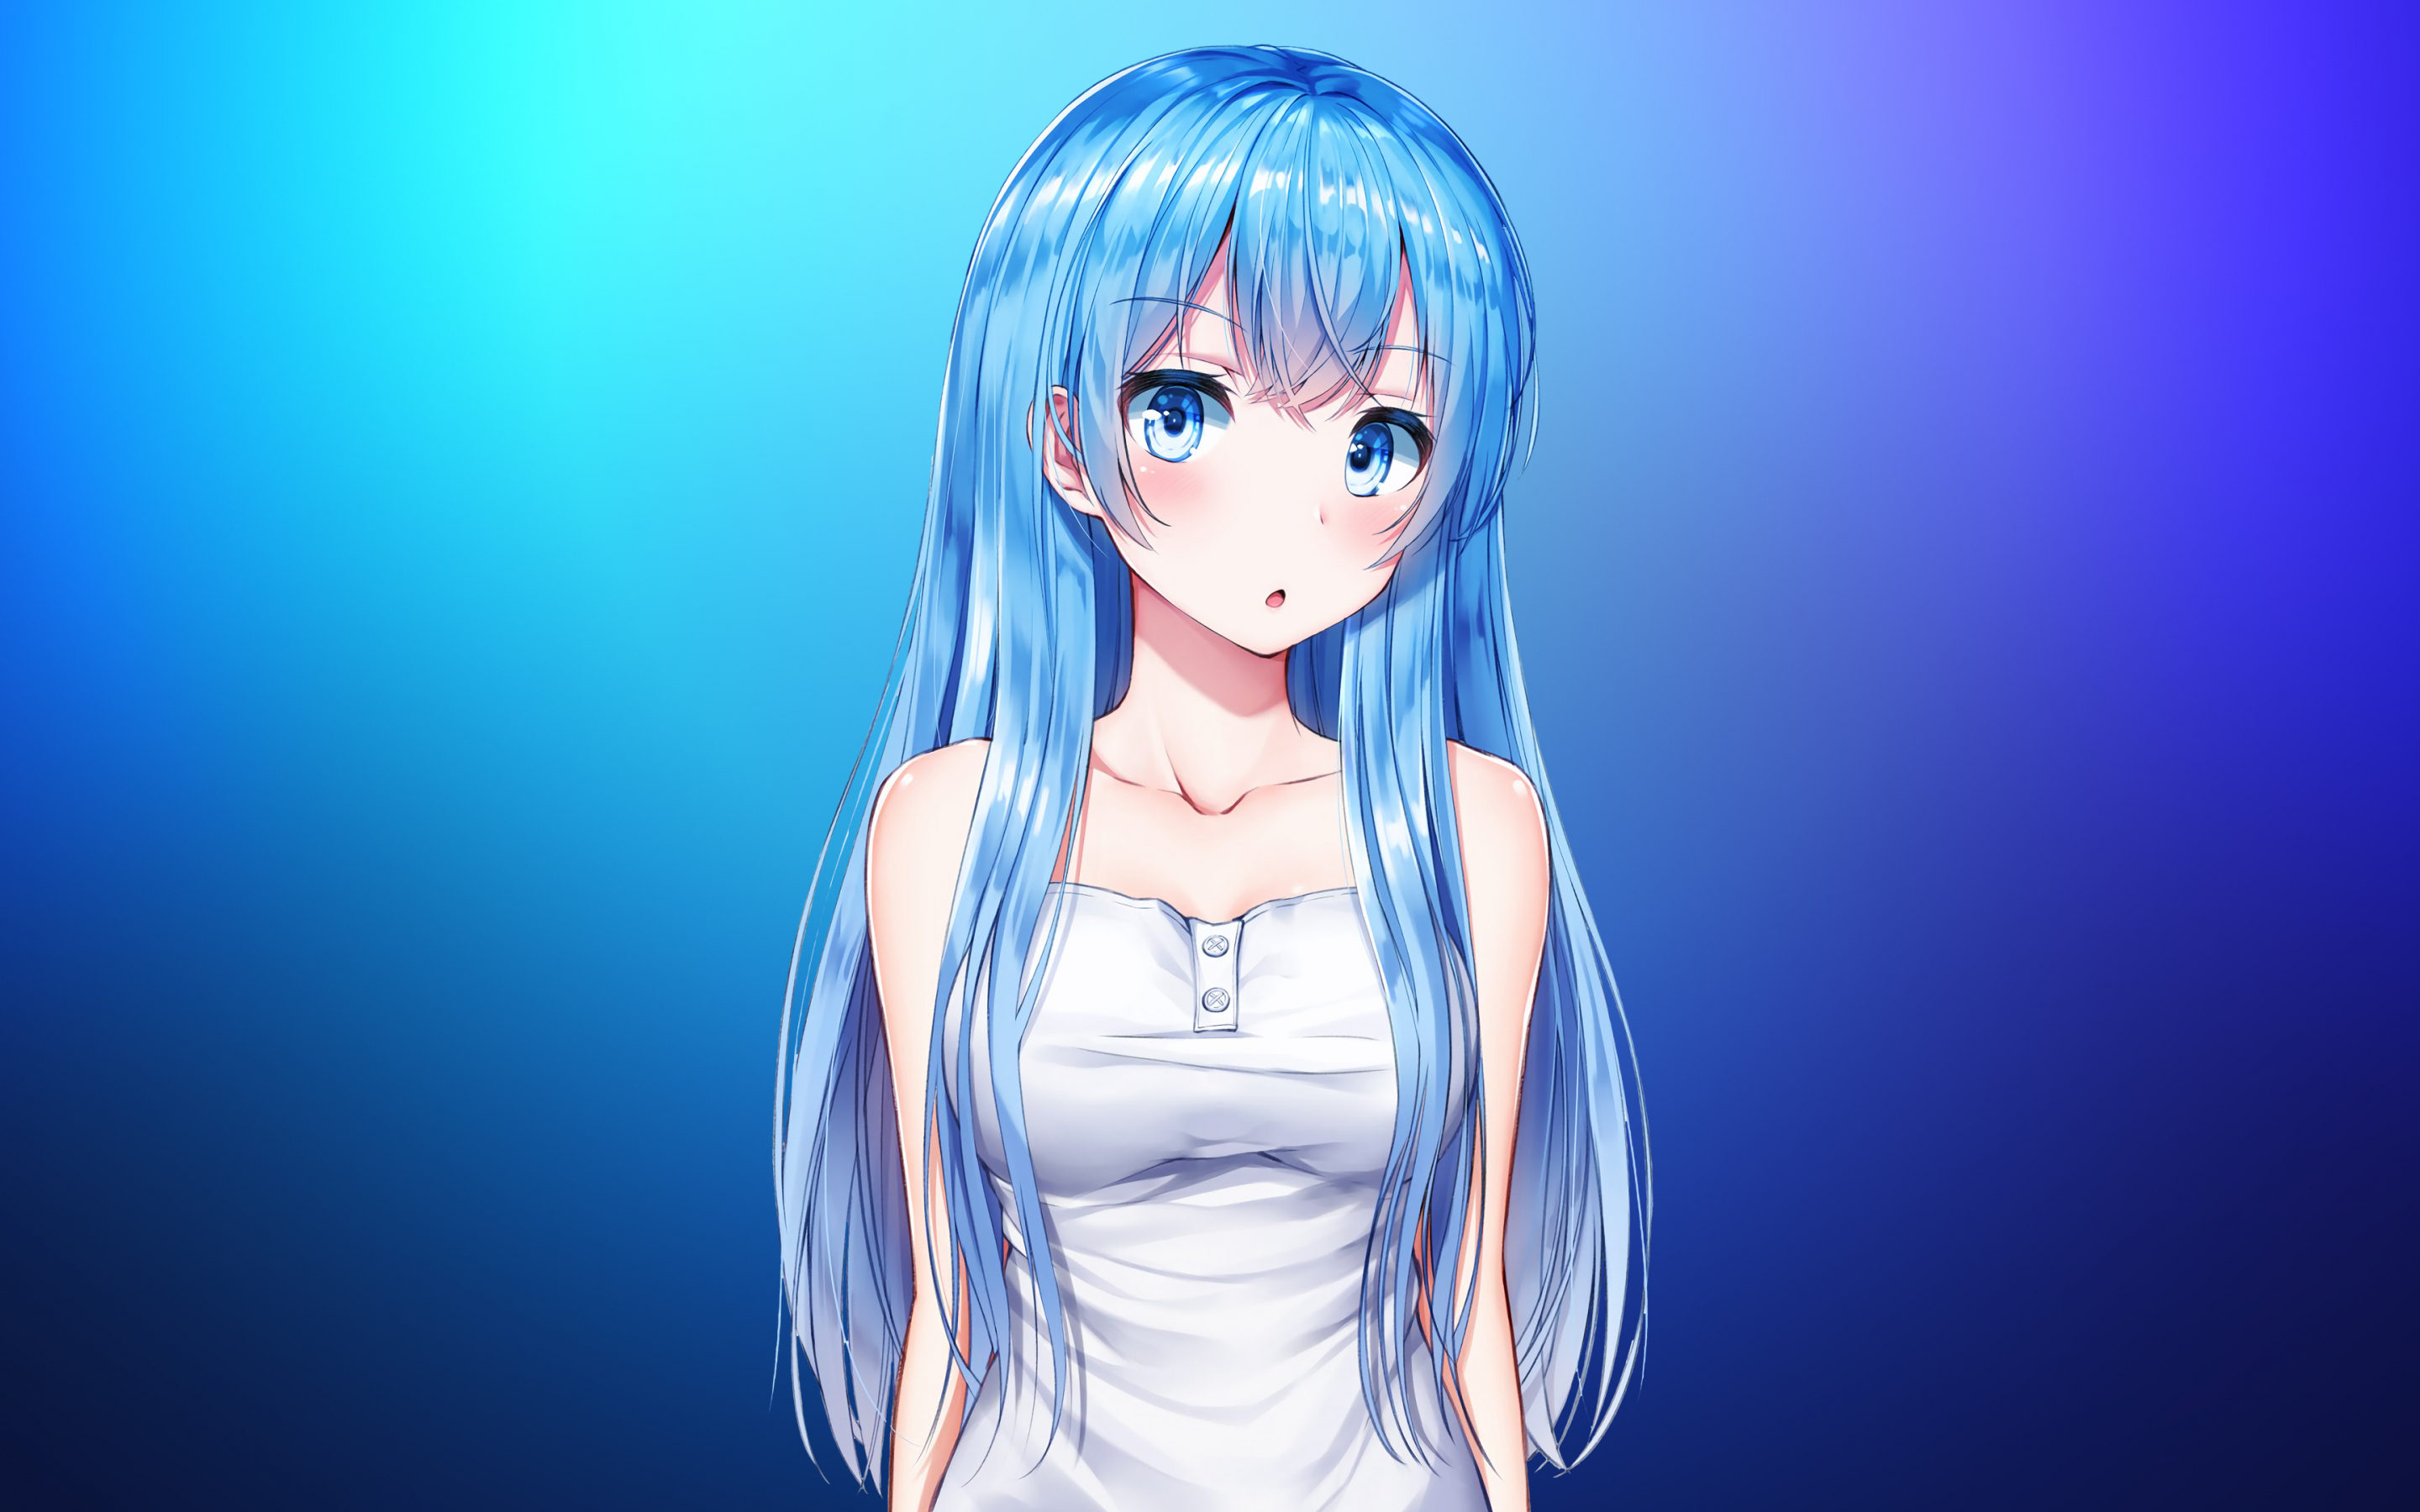 2560x1600 Anime Wallpapers for MacBook Pro 13 inch